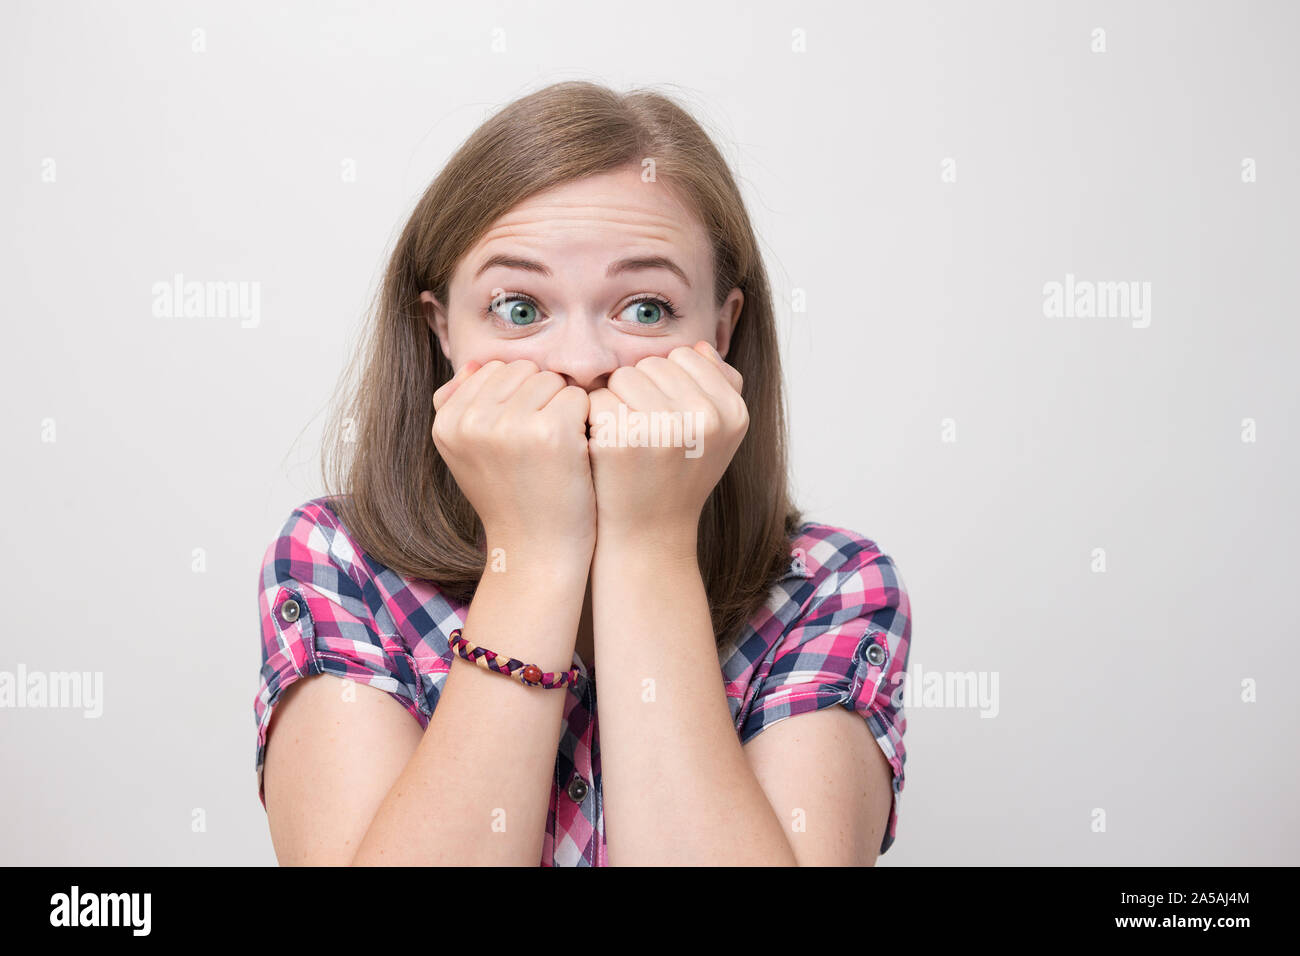 Young caucasian woman girl surprised, scared, shocked, frightened Stock Photo